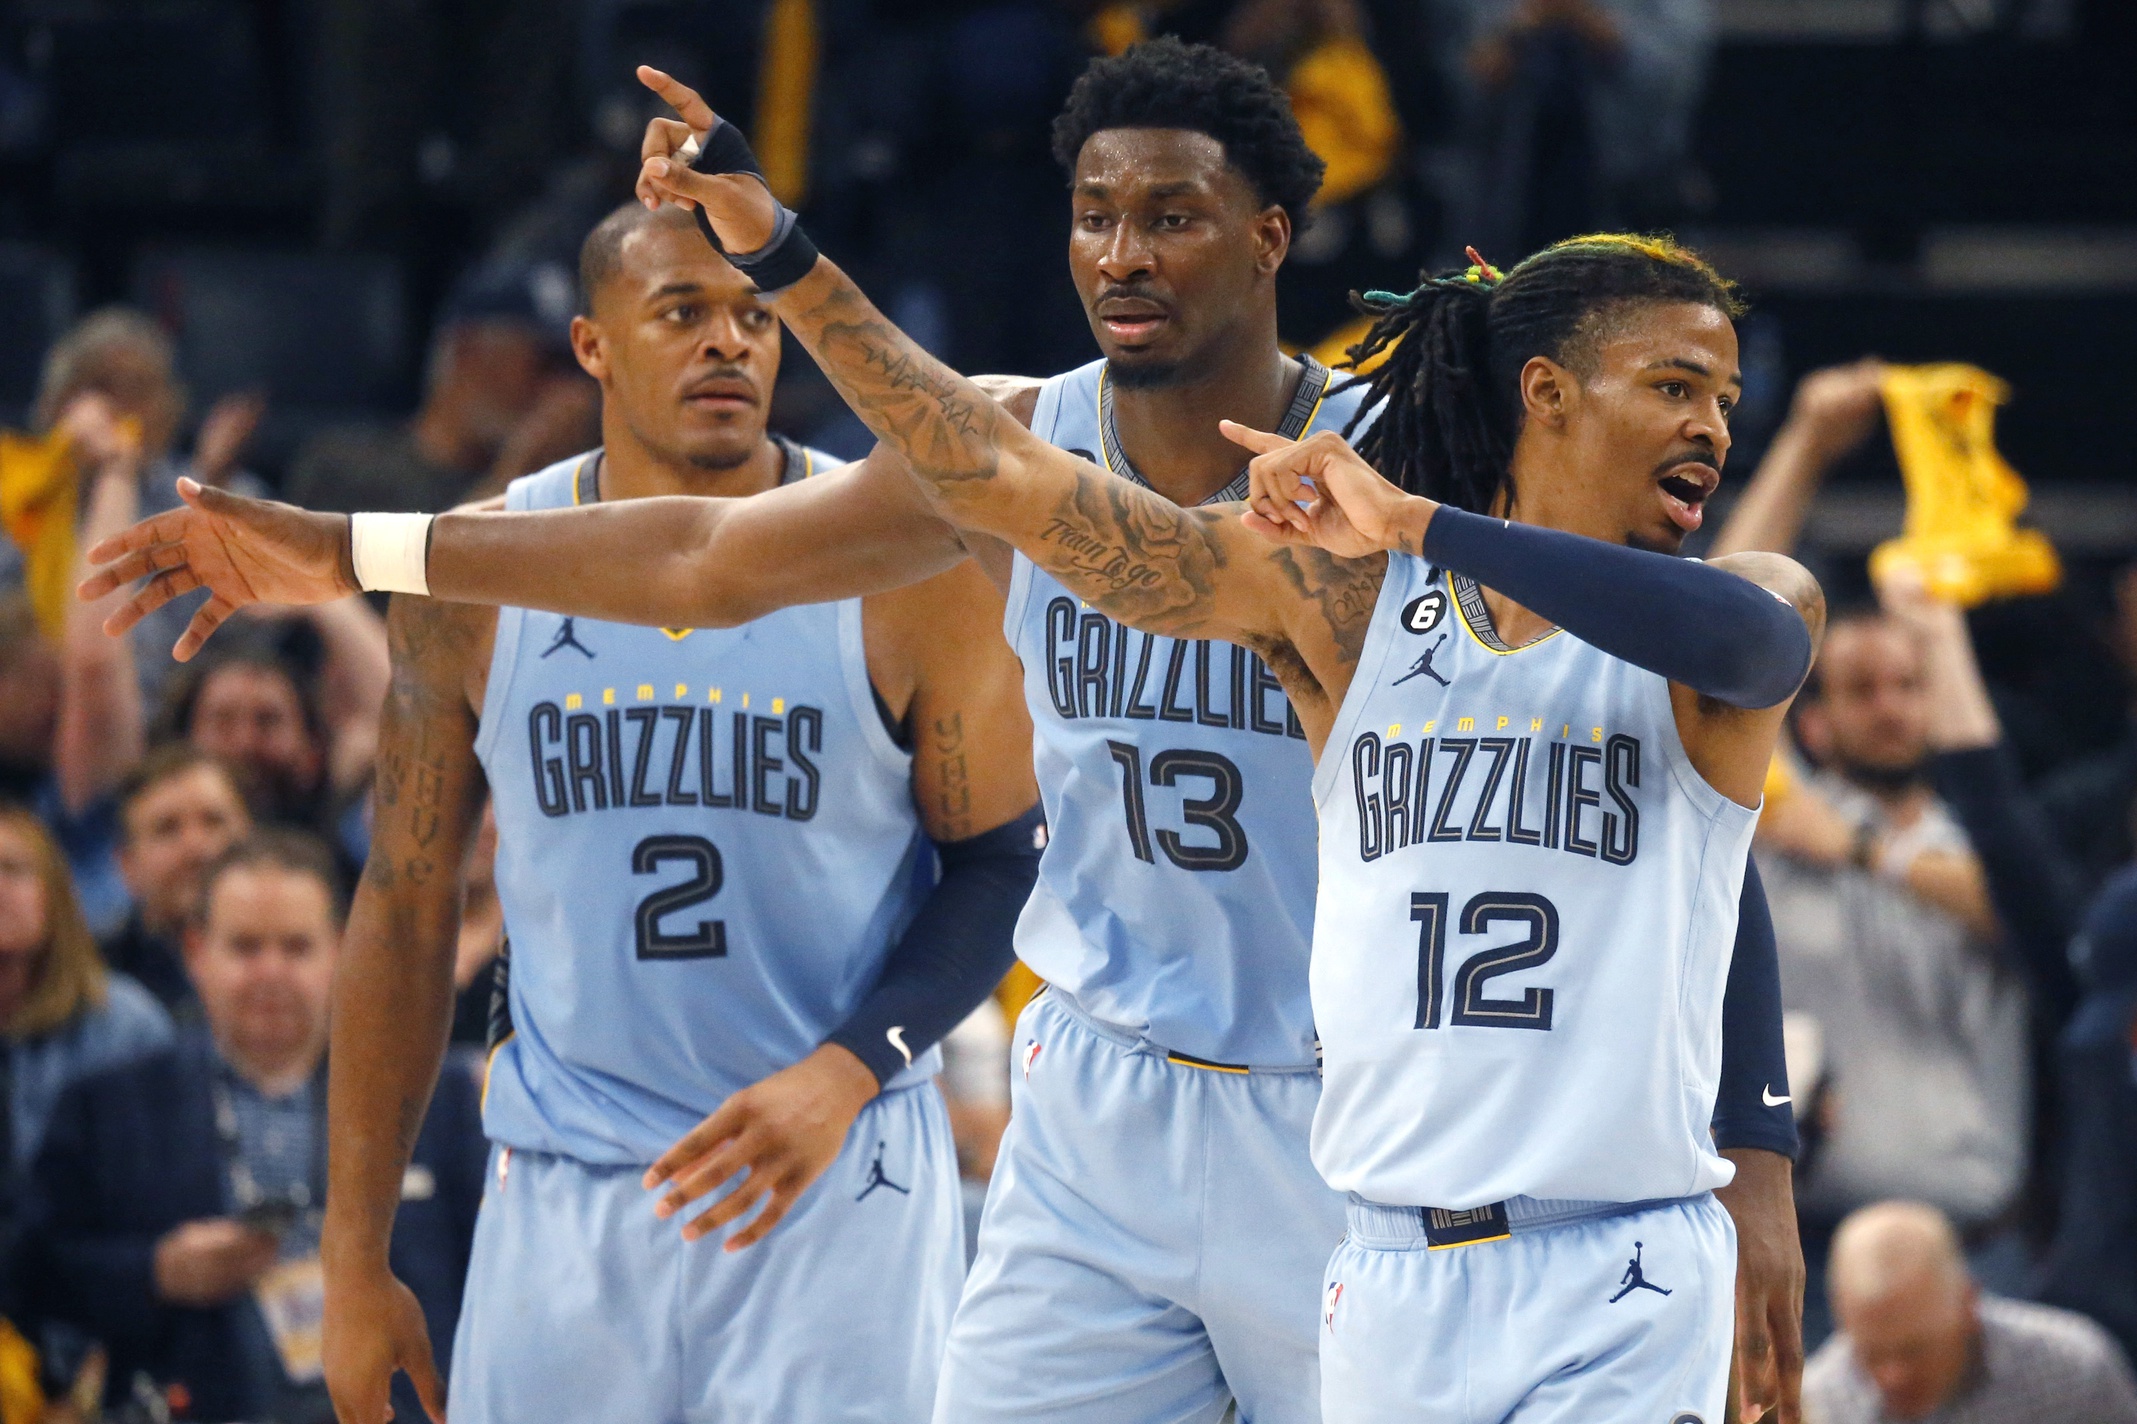 Ja Morant, a guard with the Memphis Grizzlies, has left the team